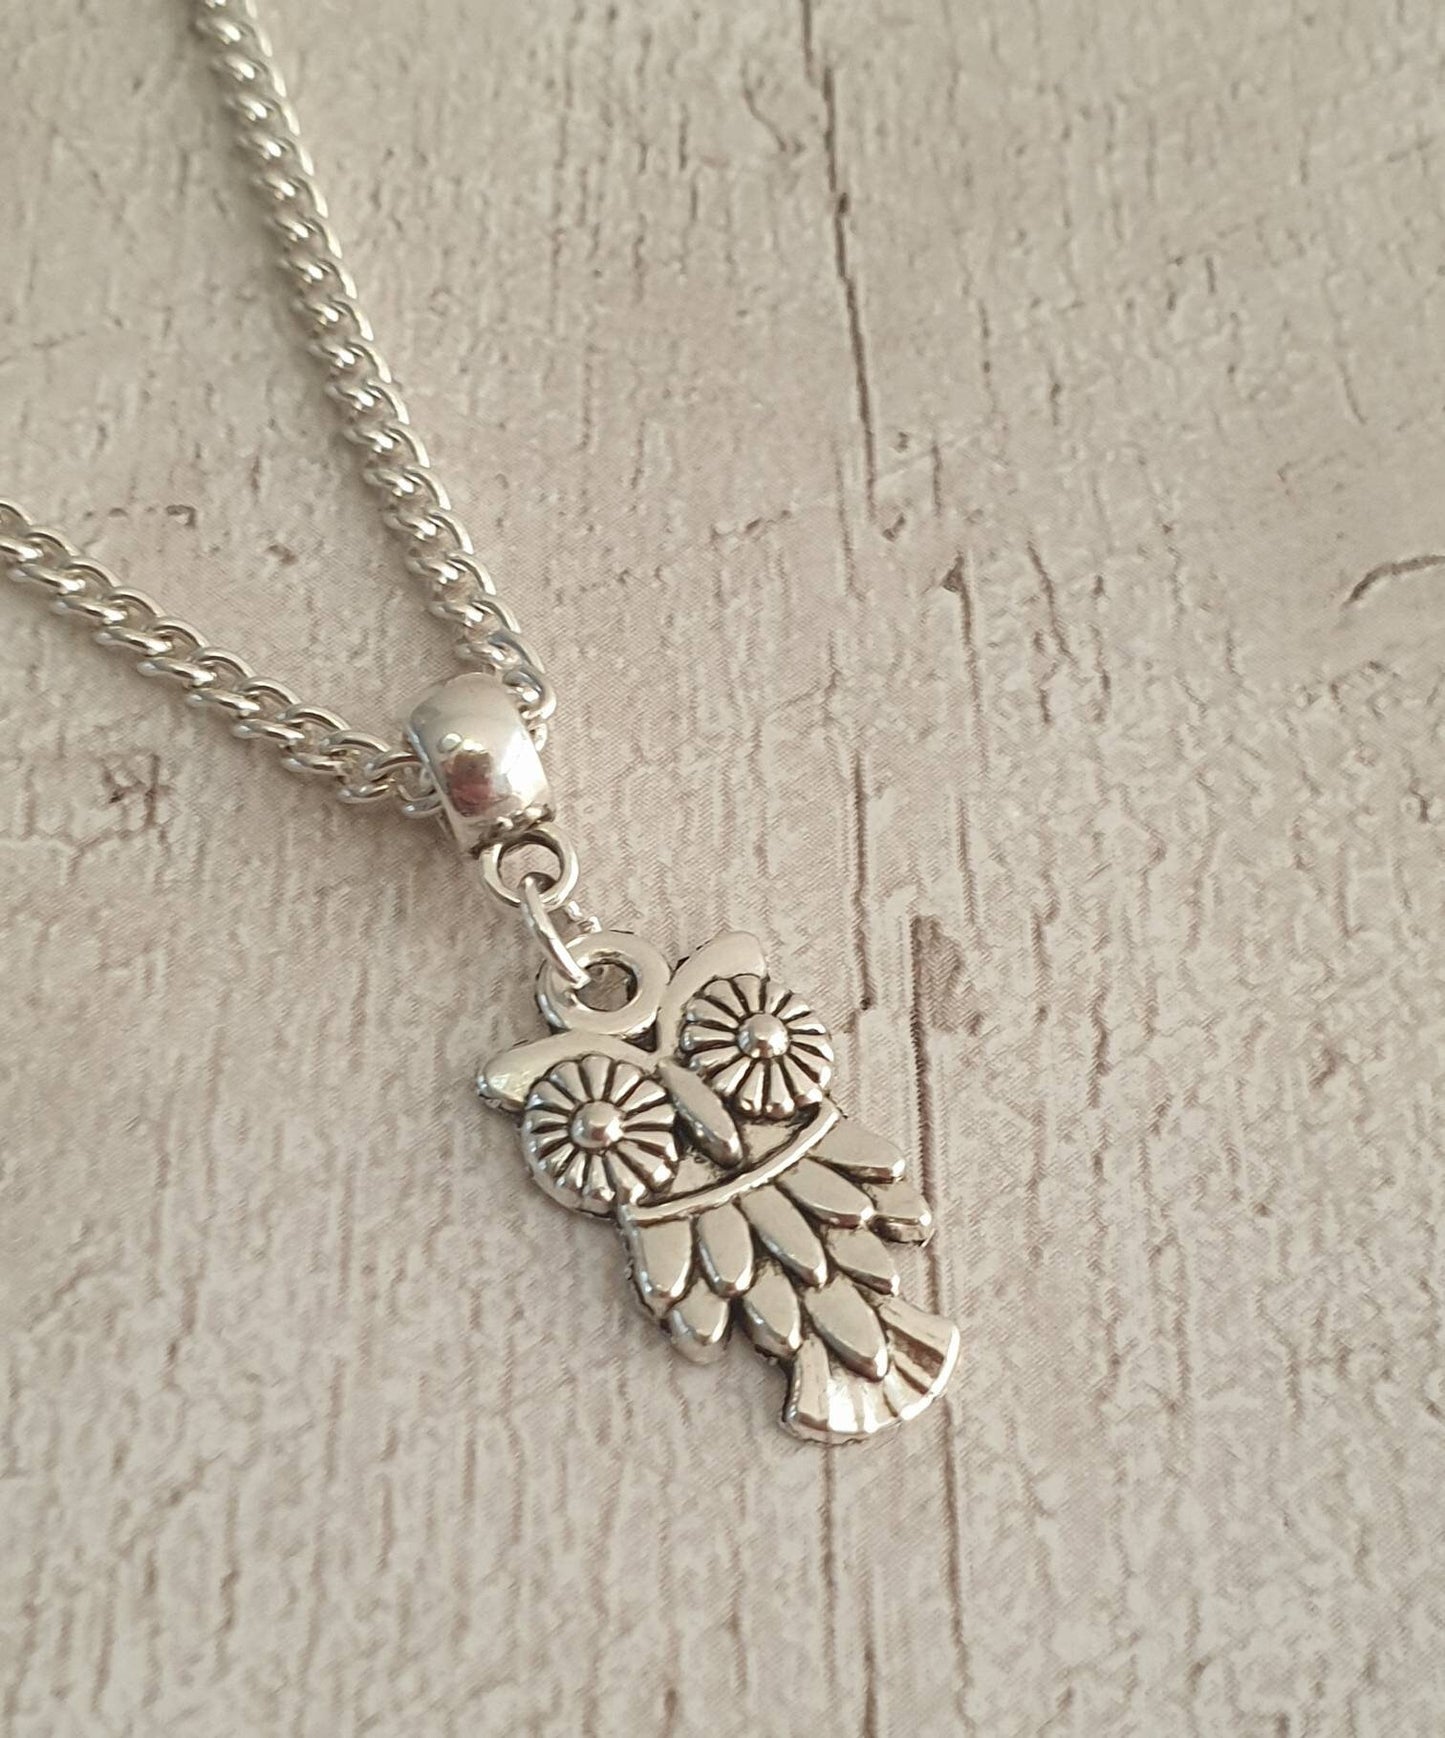 Handmade Antique Silver Owl Charm Necklace Silver Plated Or Waxed Cord Variable Lengths, Gift Packaged - Premium  from Etsy - Just £5.49! Shop now at Uniquely Holt